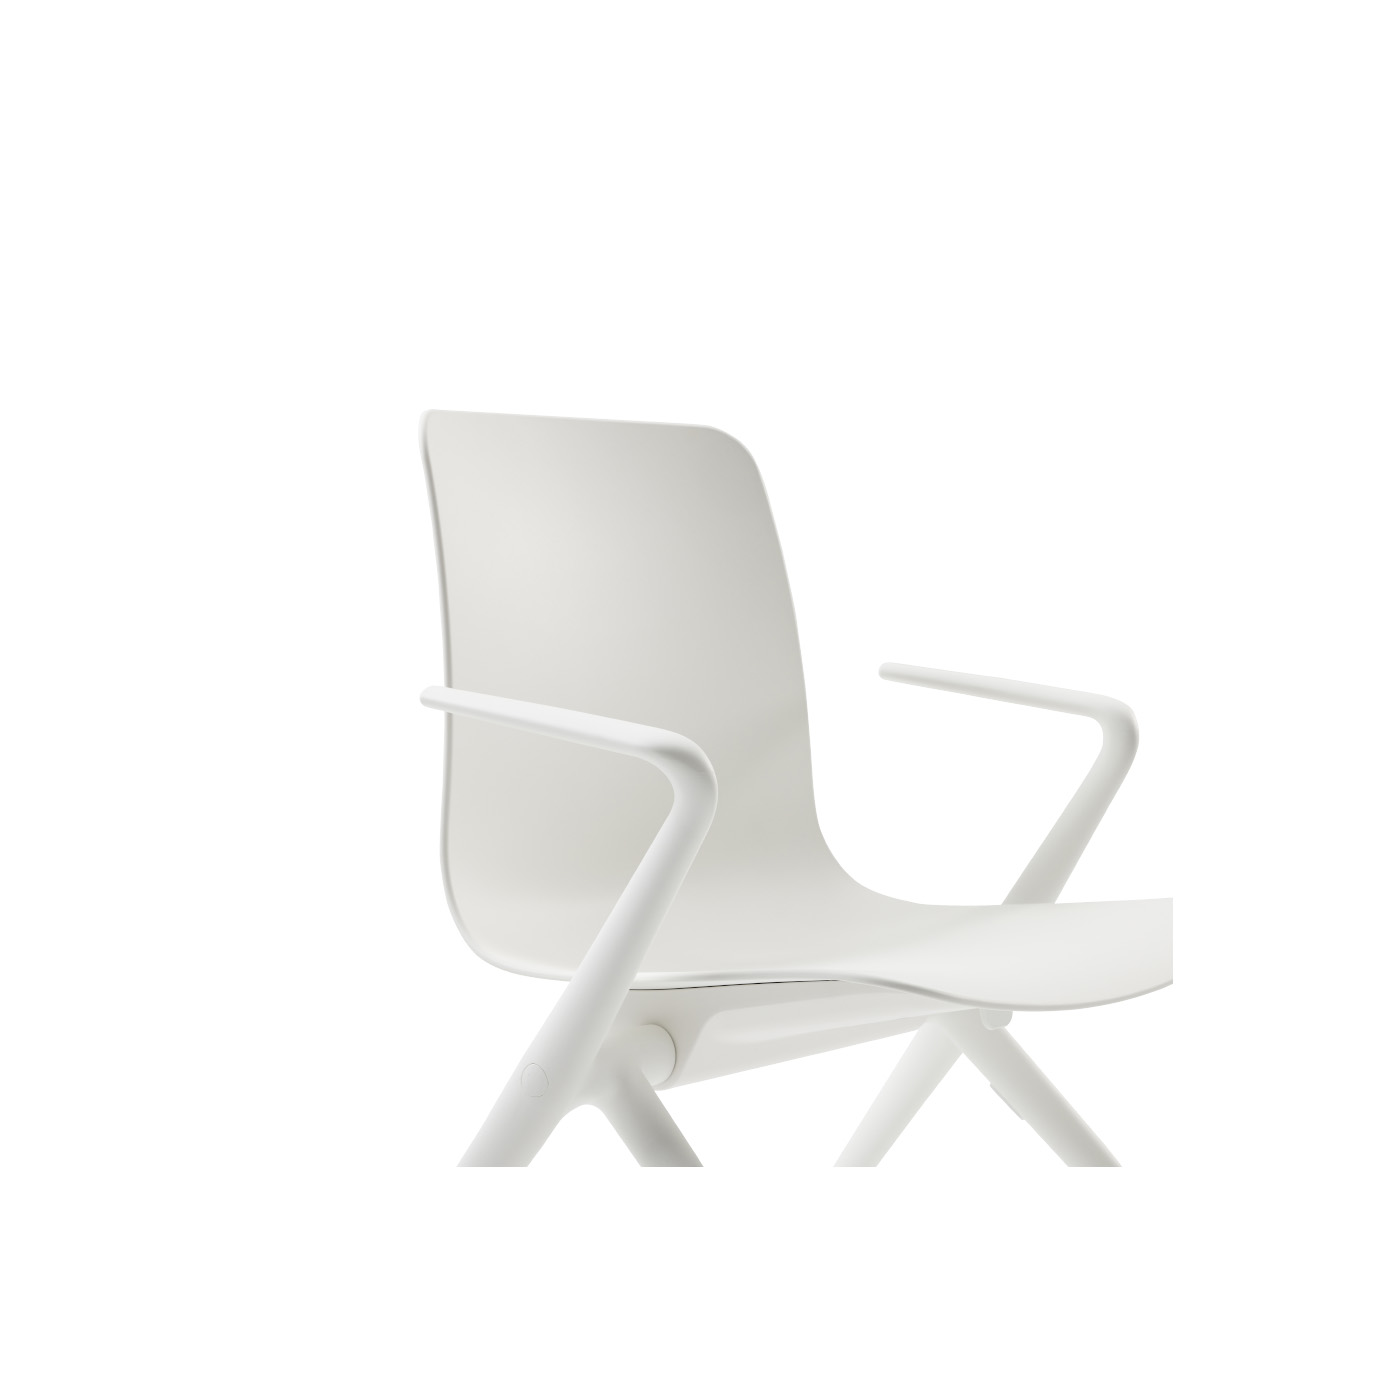 Haworth Bowi conference chair white detailed angle